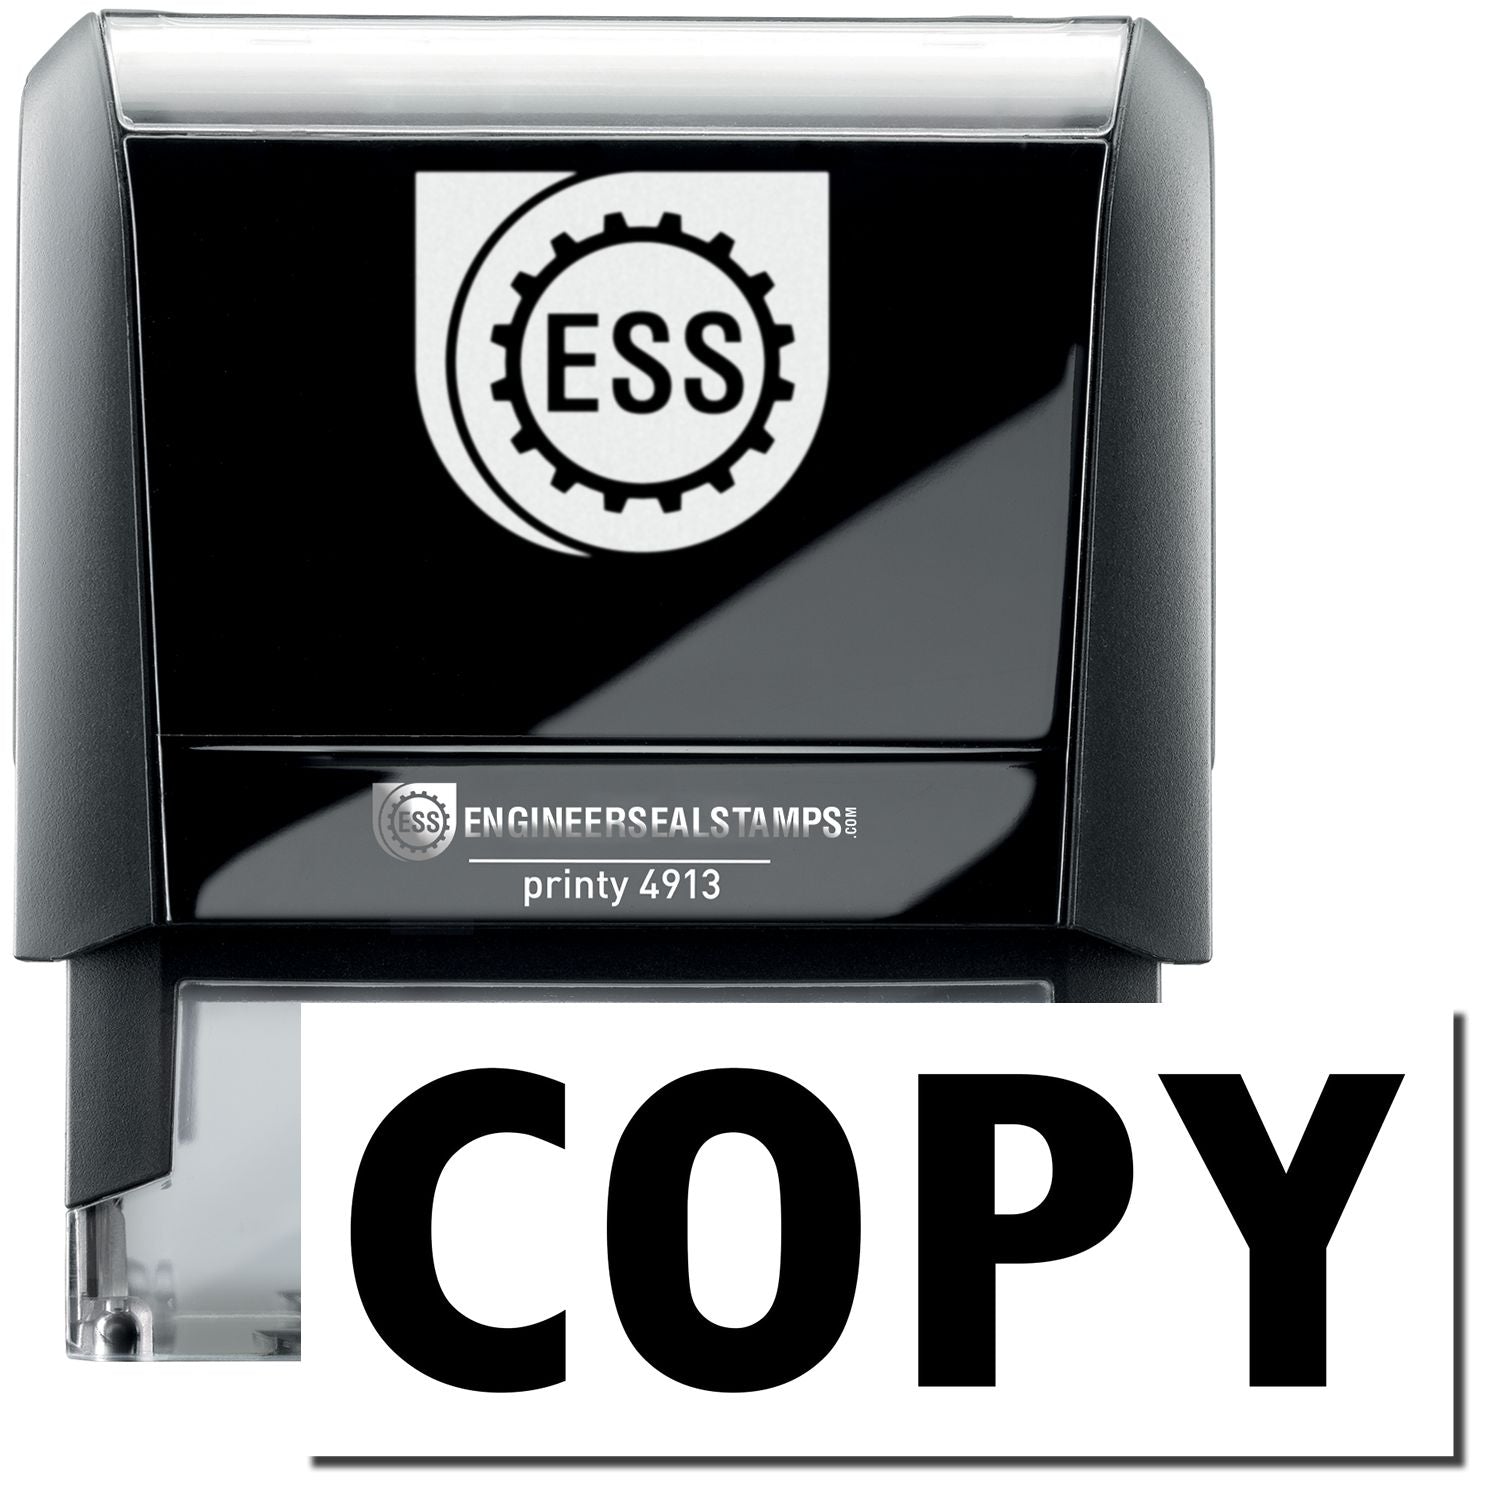 A large self-inking stamp with a stamped image showing how the text "COPY" in a large bold font is displayed by it.